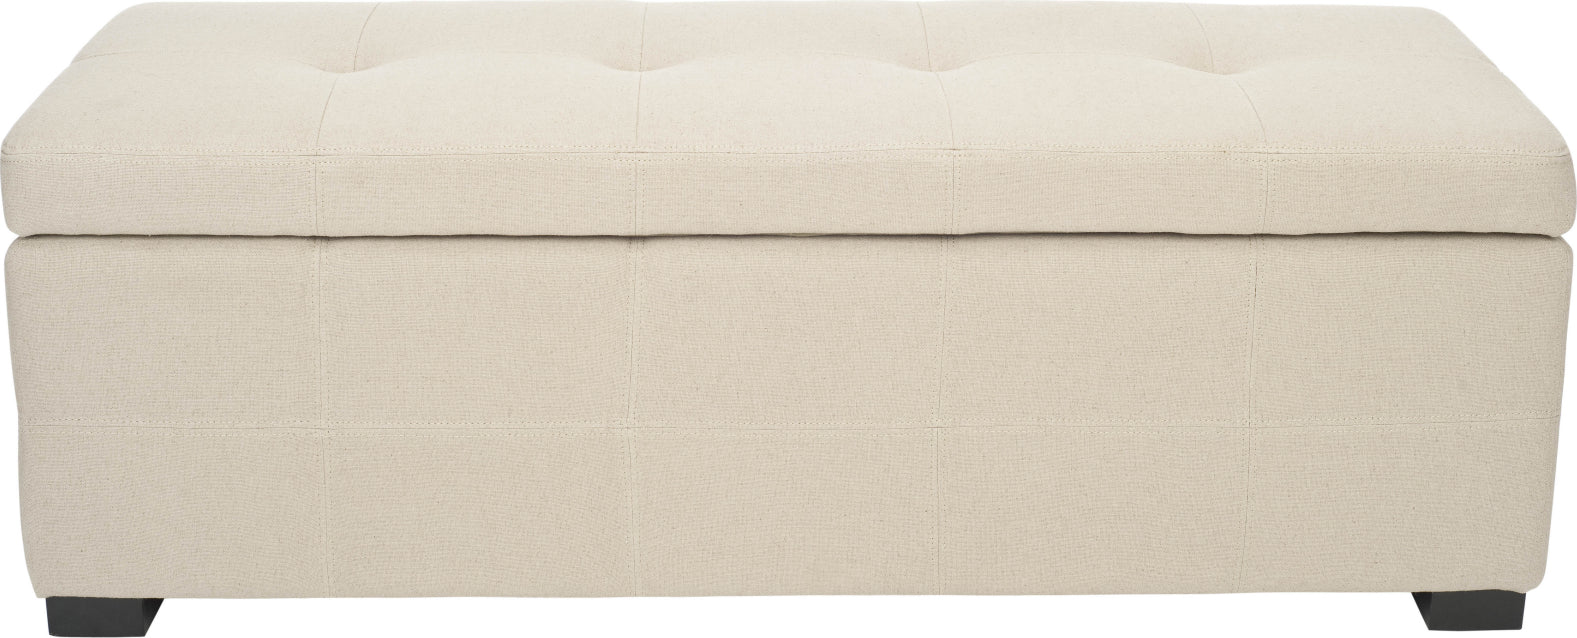 Safavieh Maiden Tufted Storage Bench Lg Taupe and Black Furniture main image